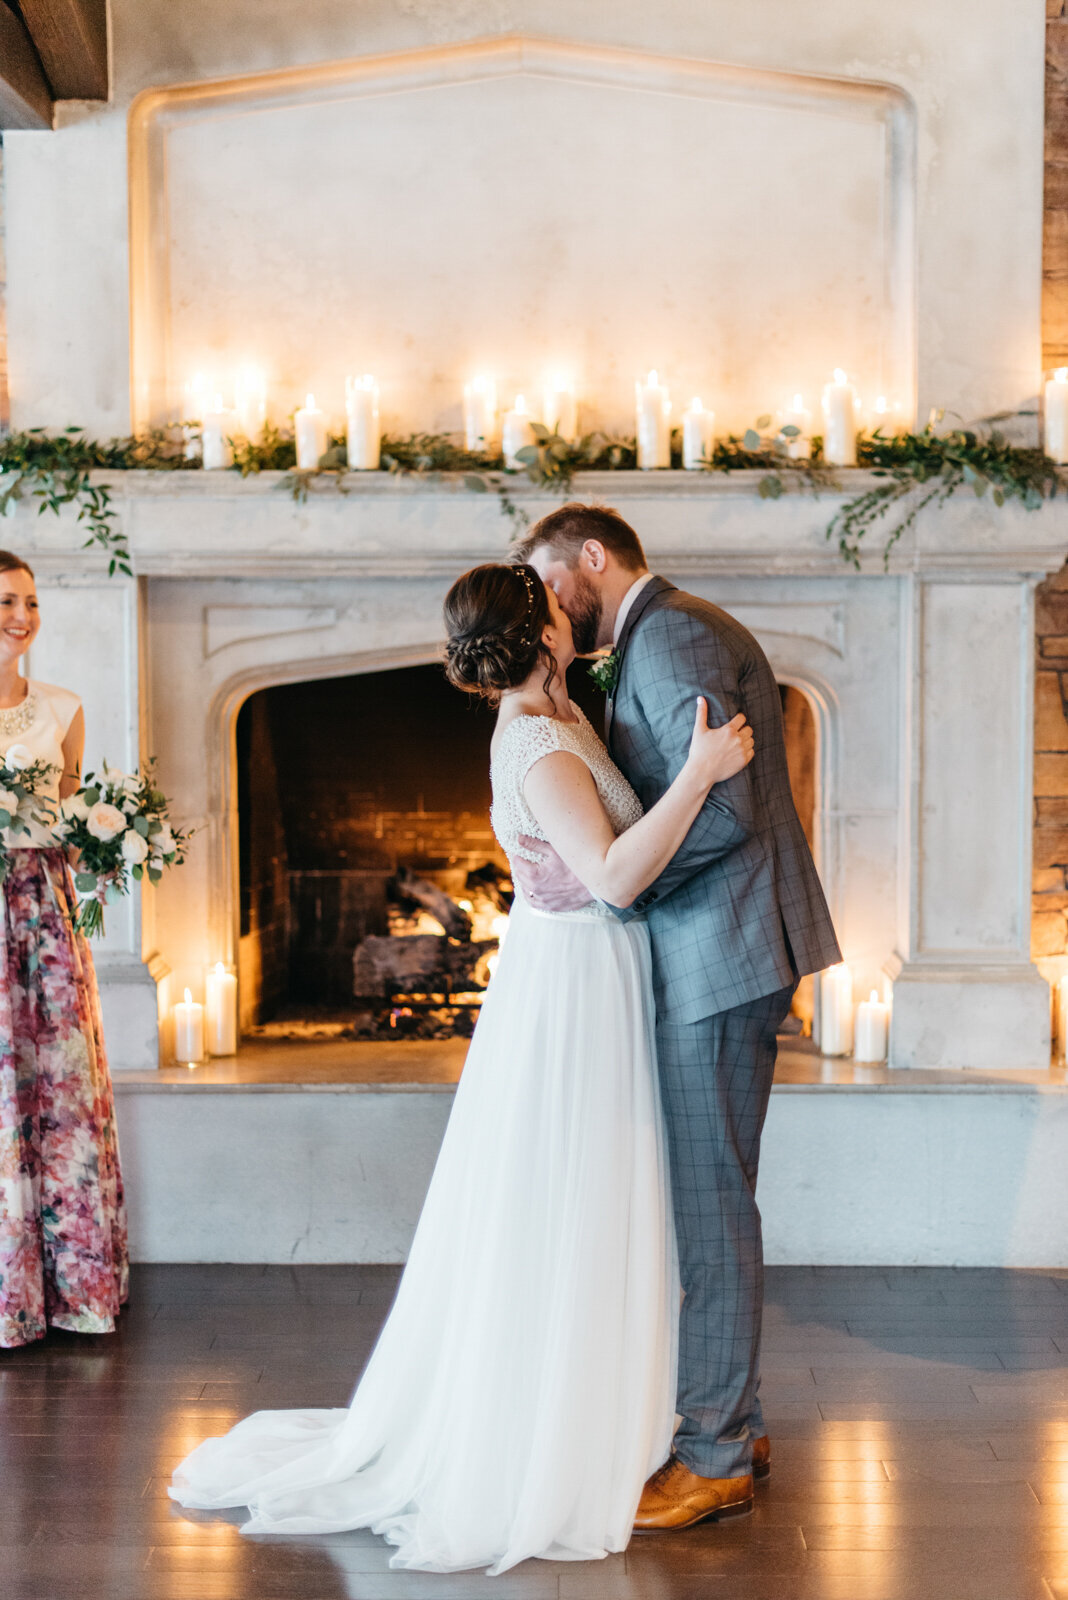 Couple kissing at their indoor wedding ceremony at The Lakehouse, a romantic sophisticated wedding venue in Calgary, featured on the Brontë Bride Vendor Guide.